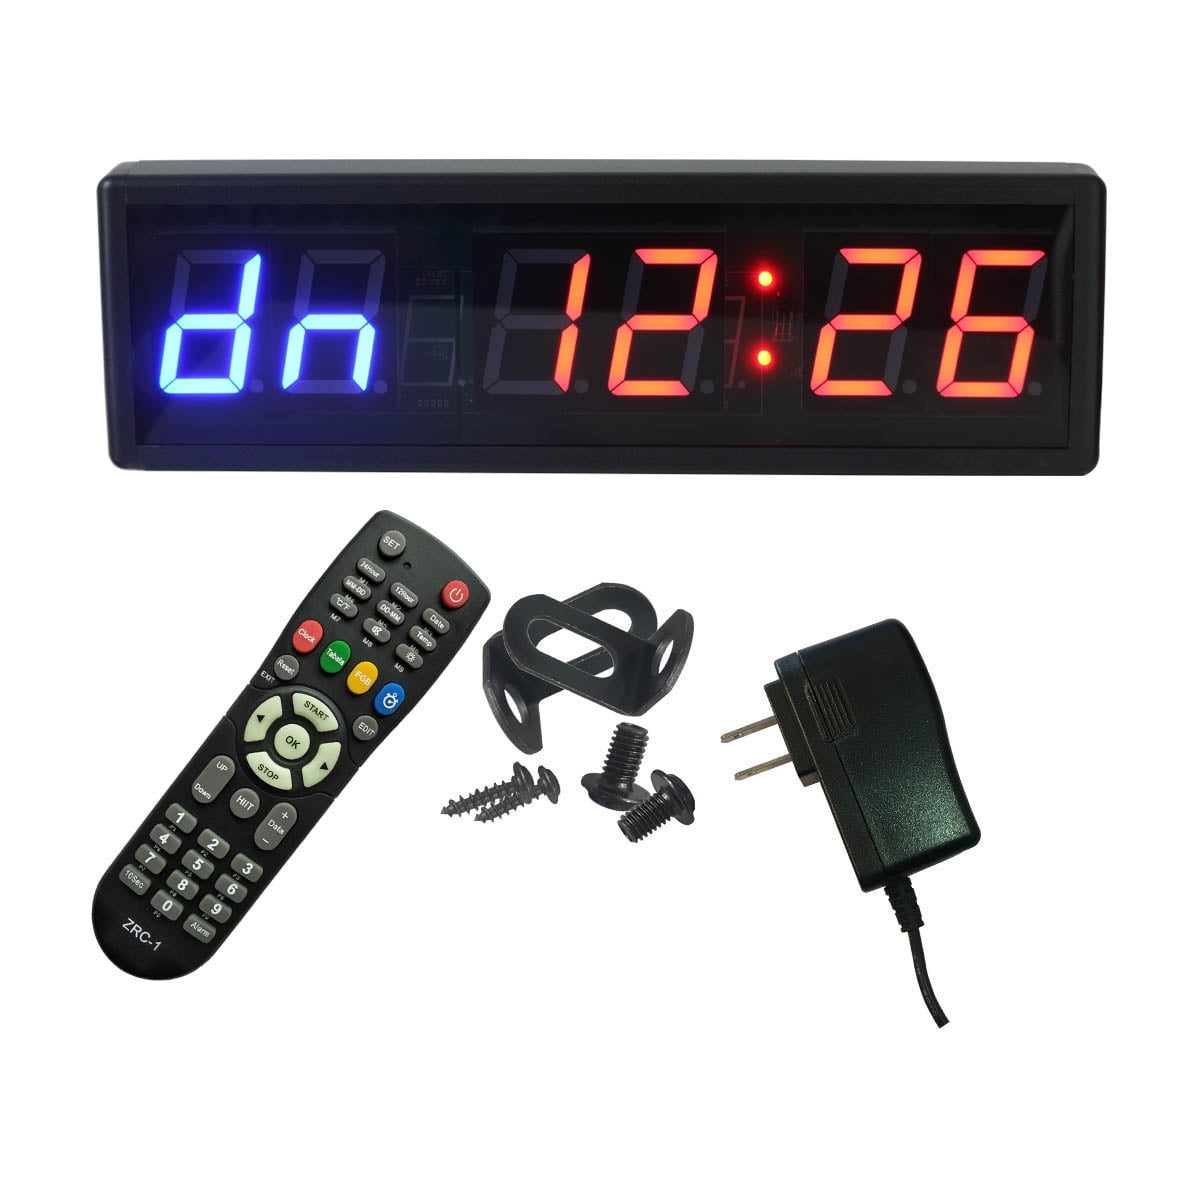 3 Countdown Clock Led Digital Wall Clock Game Timer With Stopwach  Functions